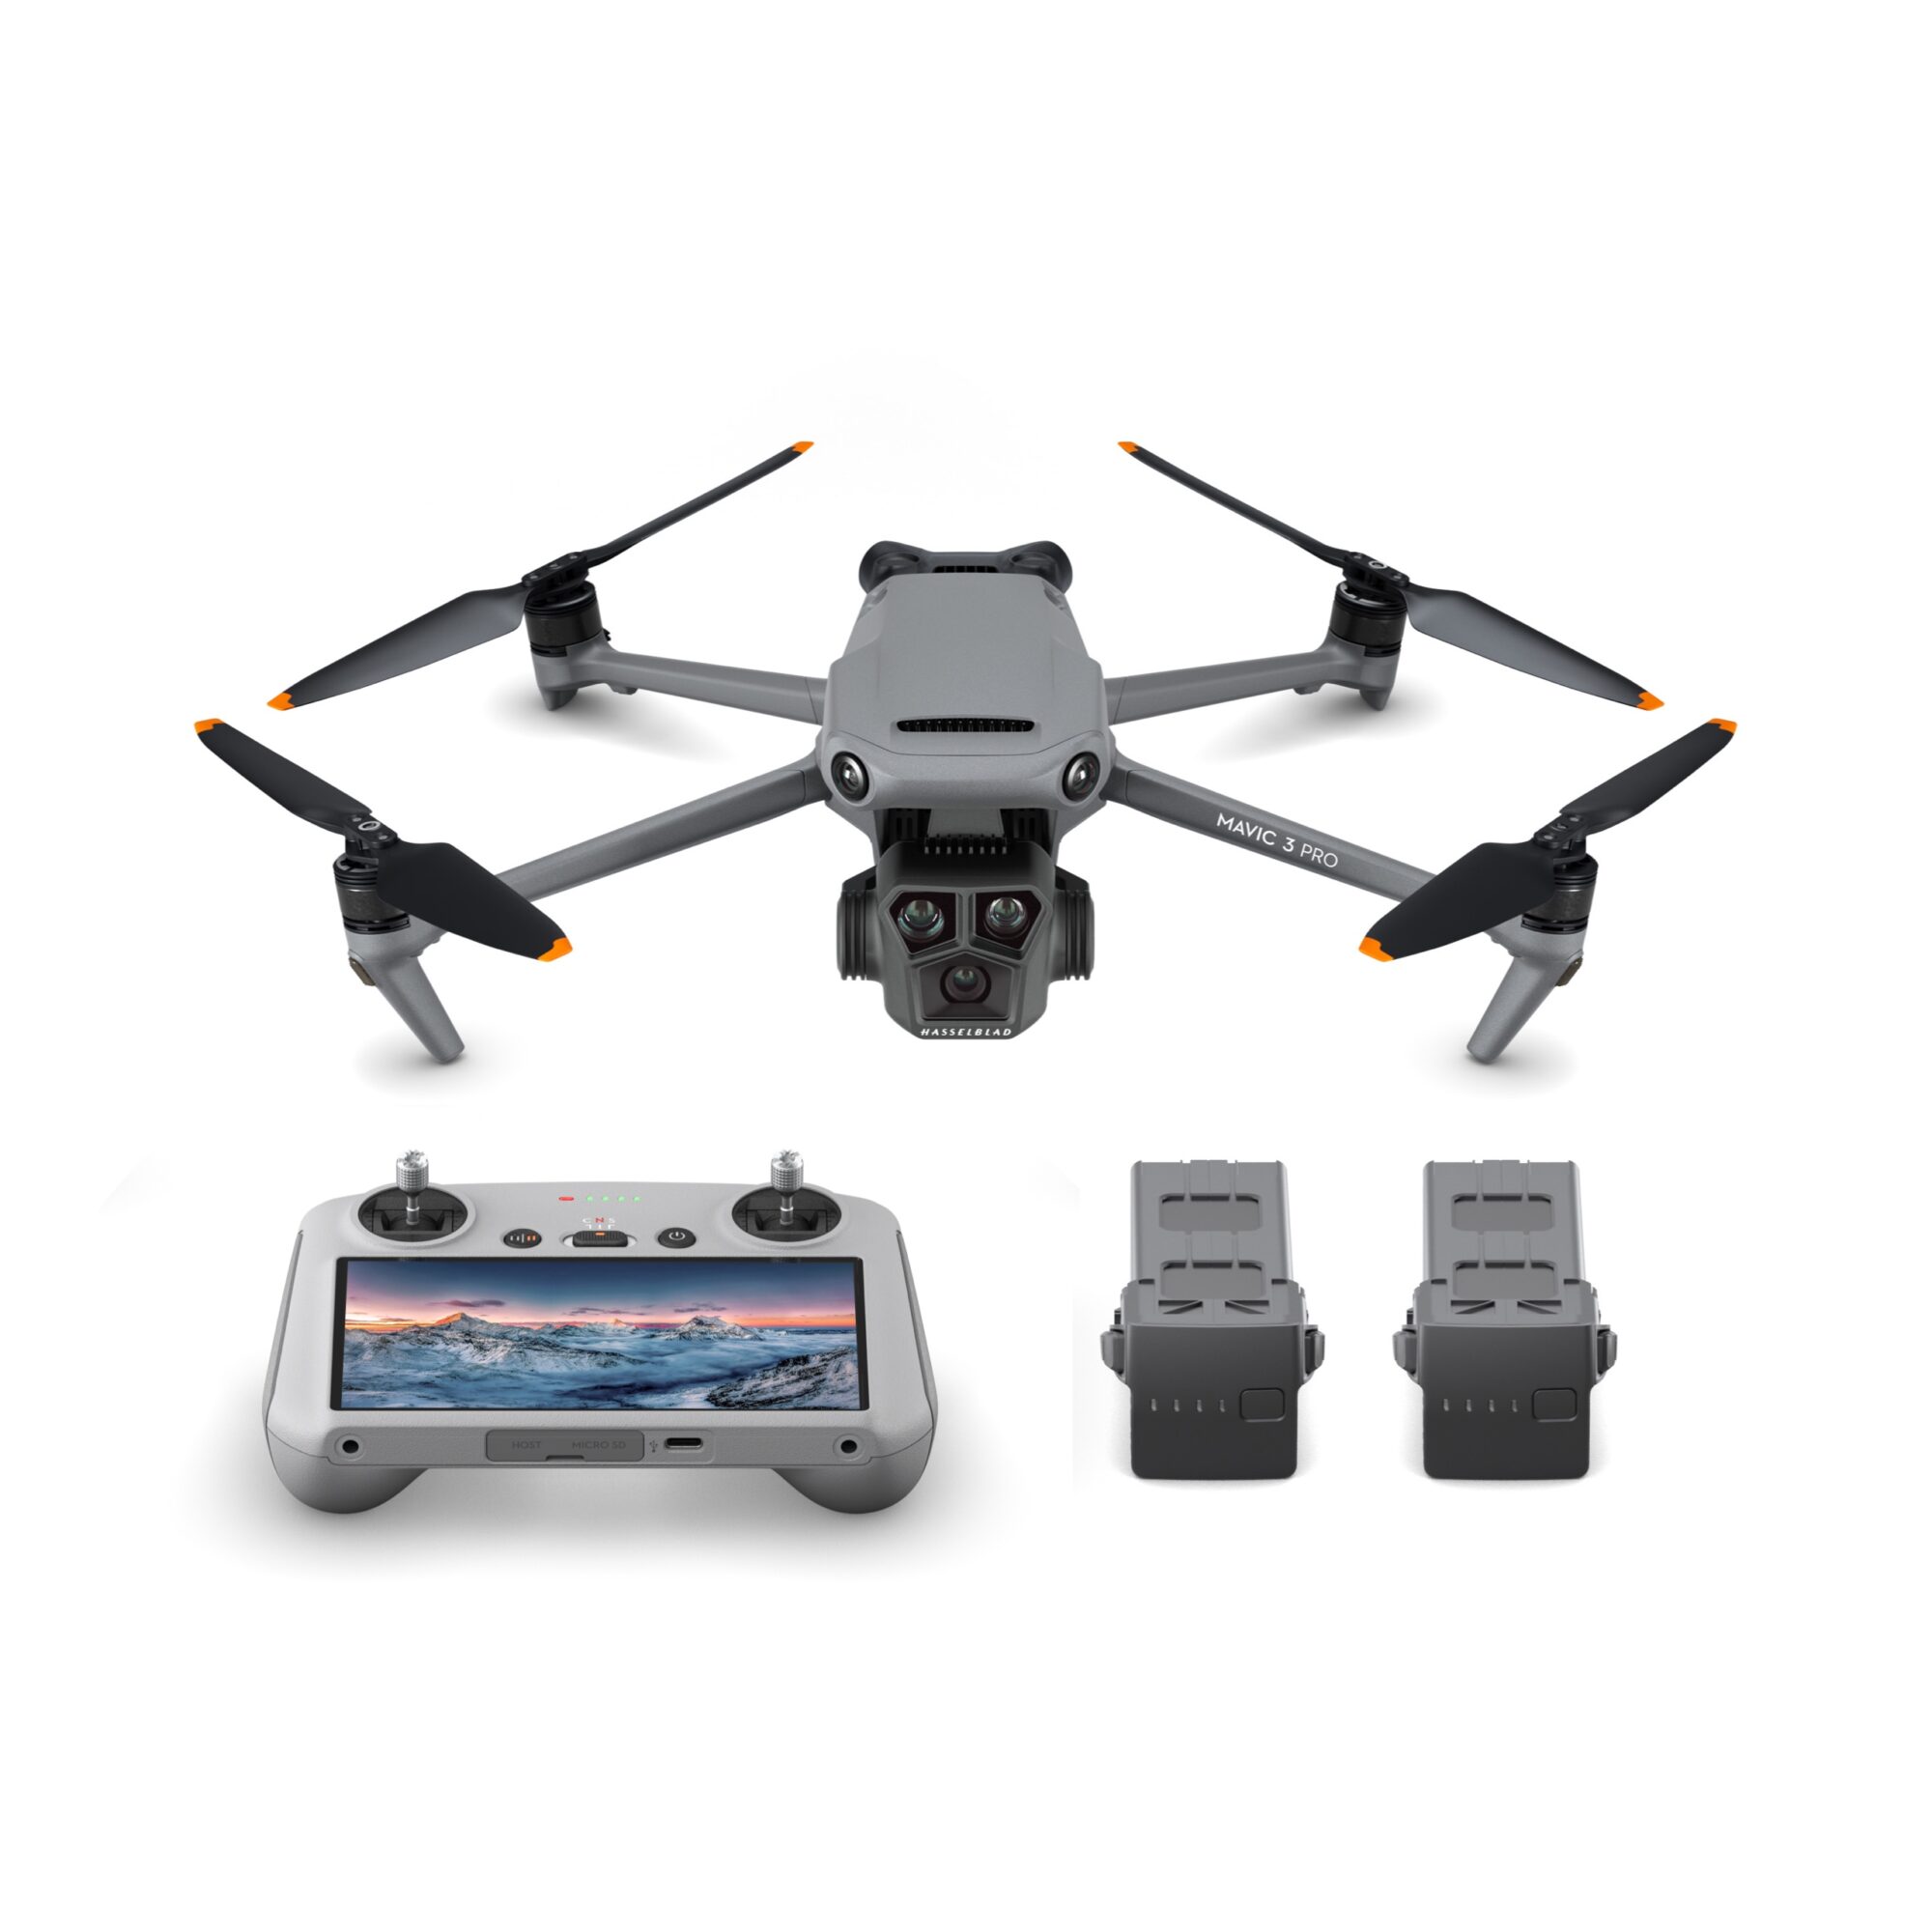 DJI Mavic 3 Pro (DJI RC) Fly More Combo - Includes DJI RC, Two Additional Batteries, a Battery Charging Hub, an ND Filters Set, and More.